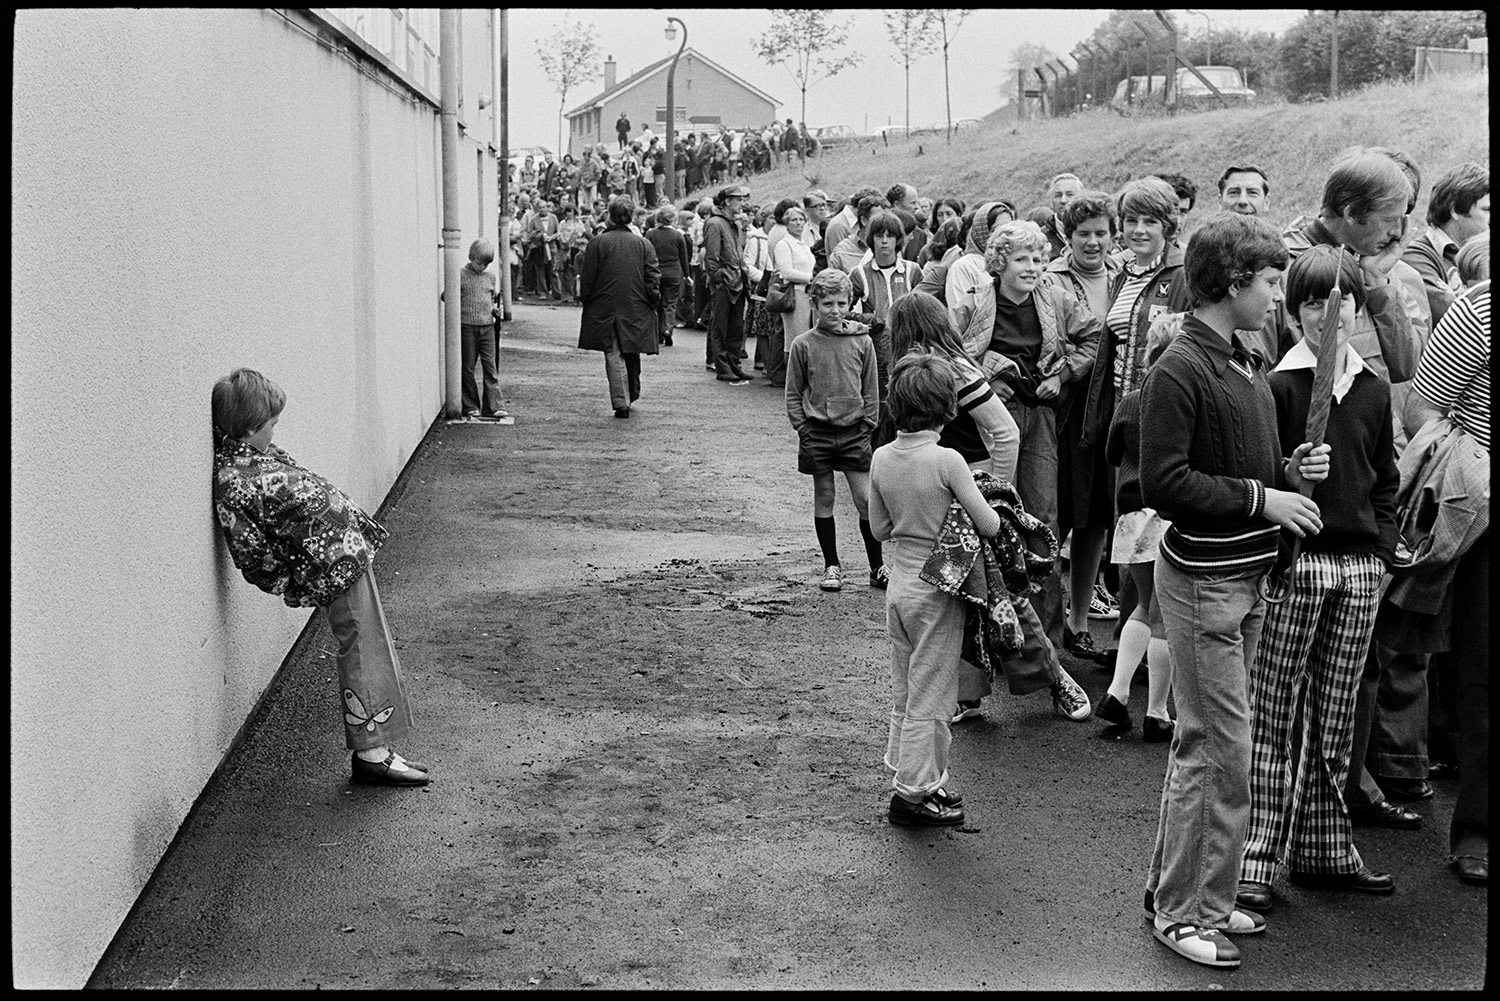 Management and workers at glass factory. 
[People queuing up to visit the Dartington Glass factory, now known as Dartington Crystal, at Torrington. Men, women and children are queuing and one child is leaning against a wall.]